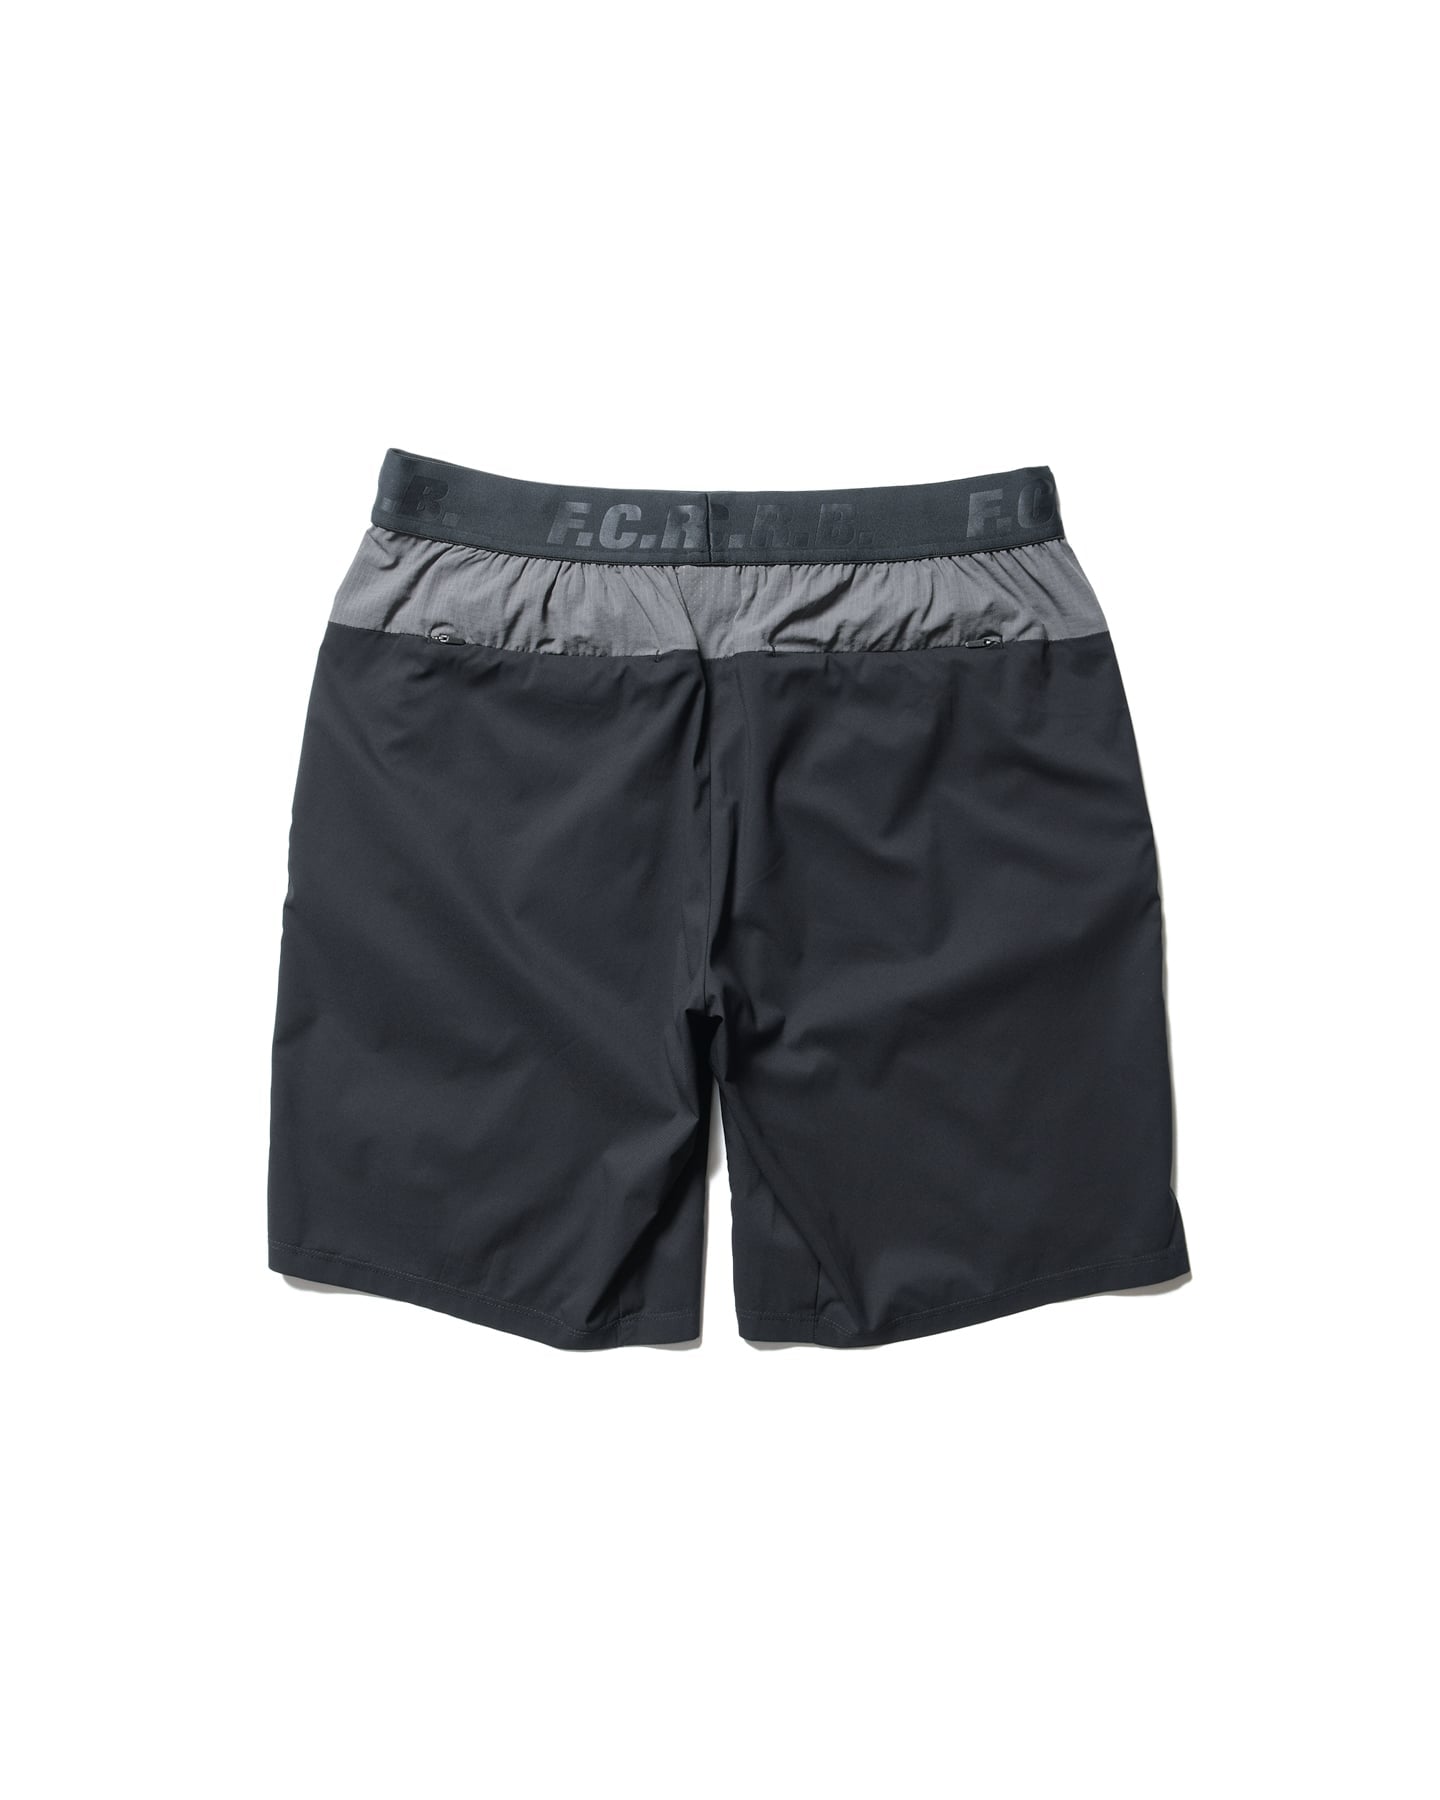 STRETCH LIGHT WEIGHT EASY SHORTS